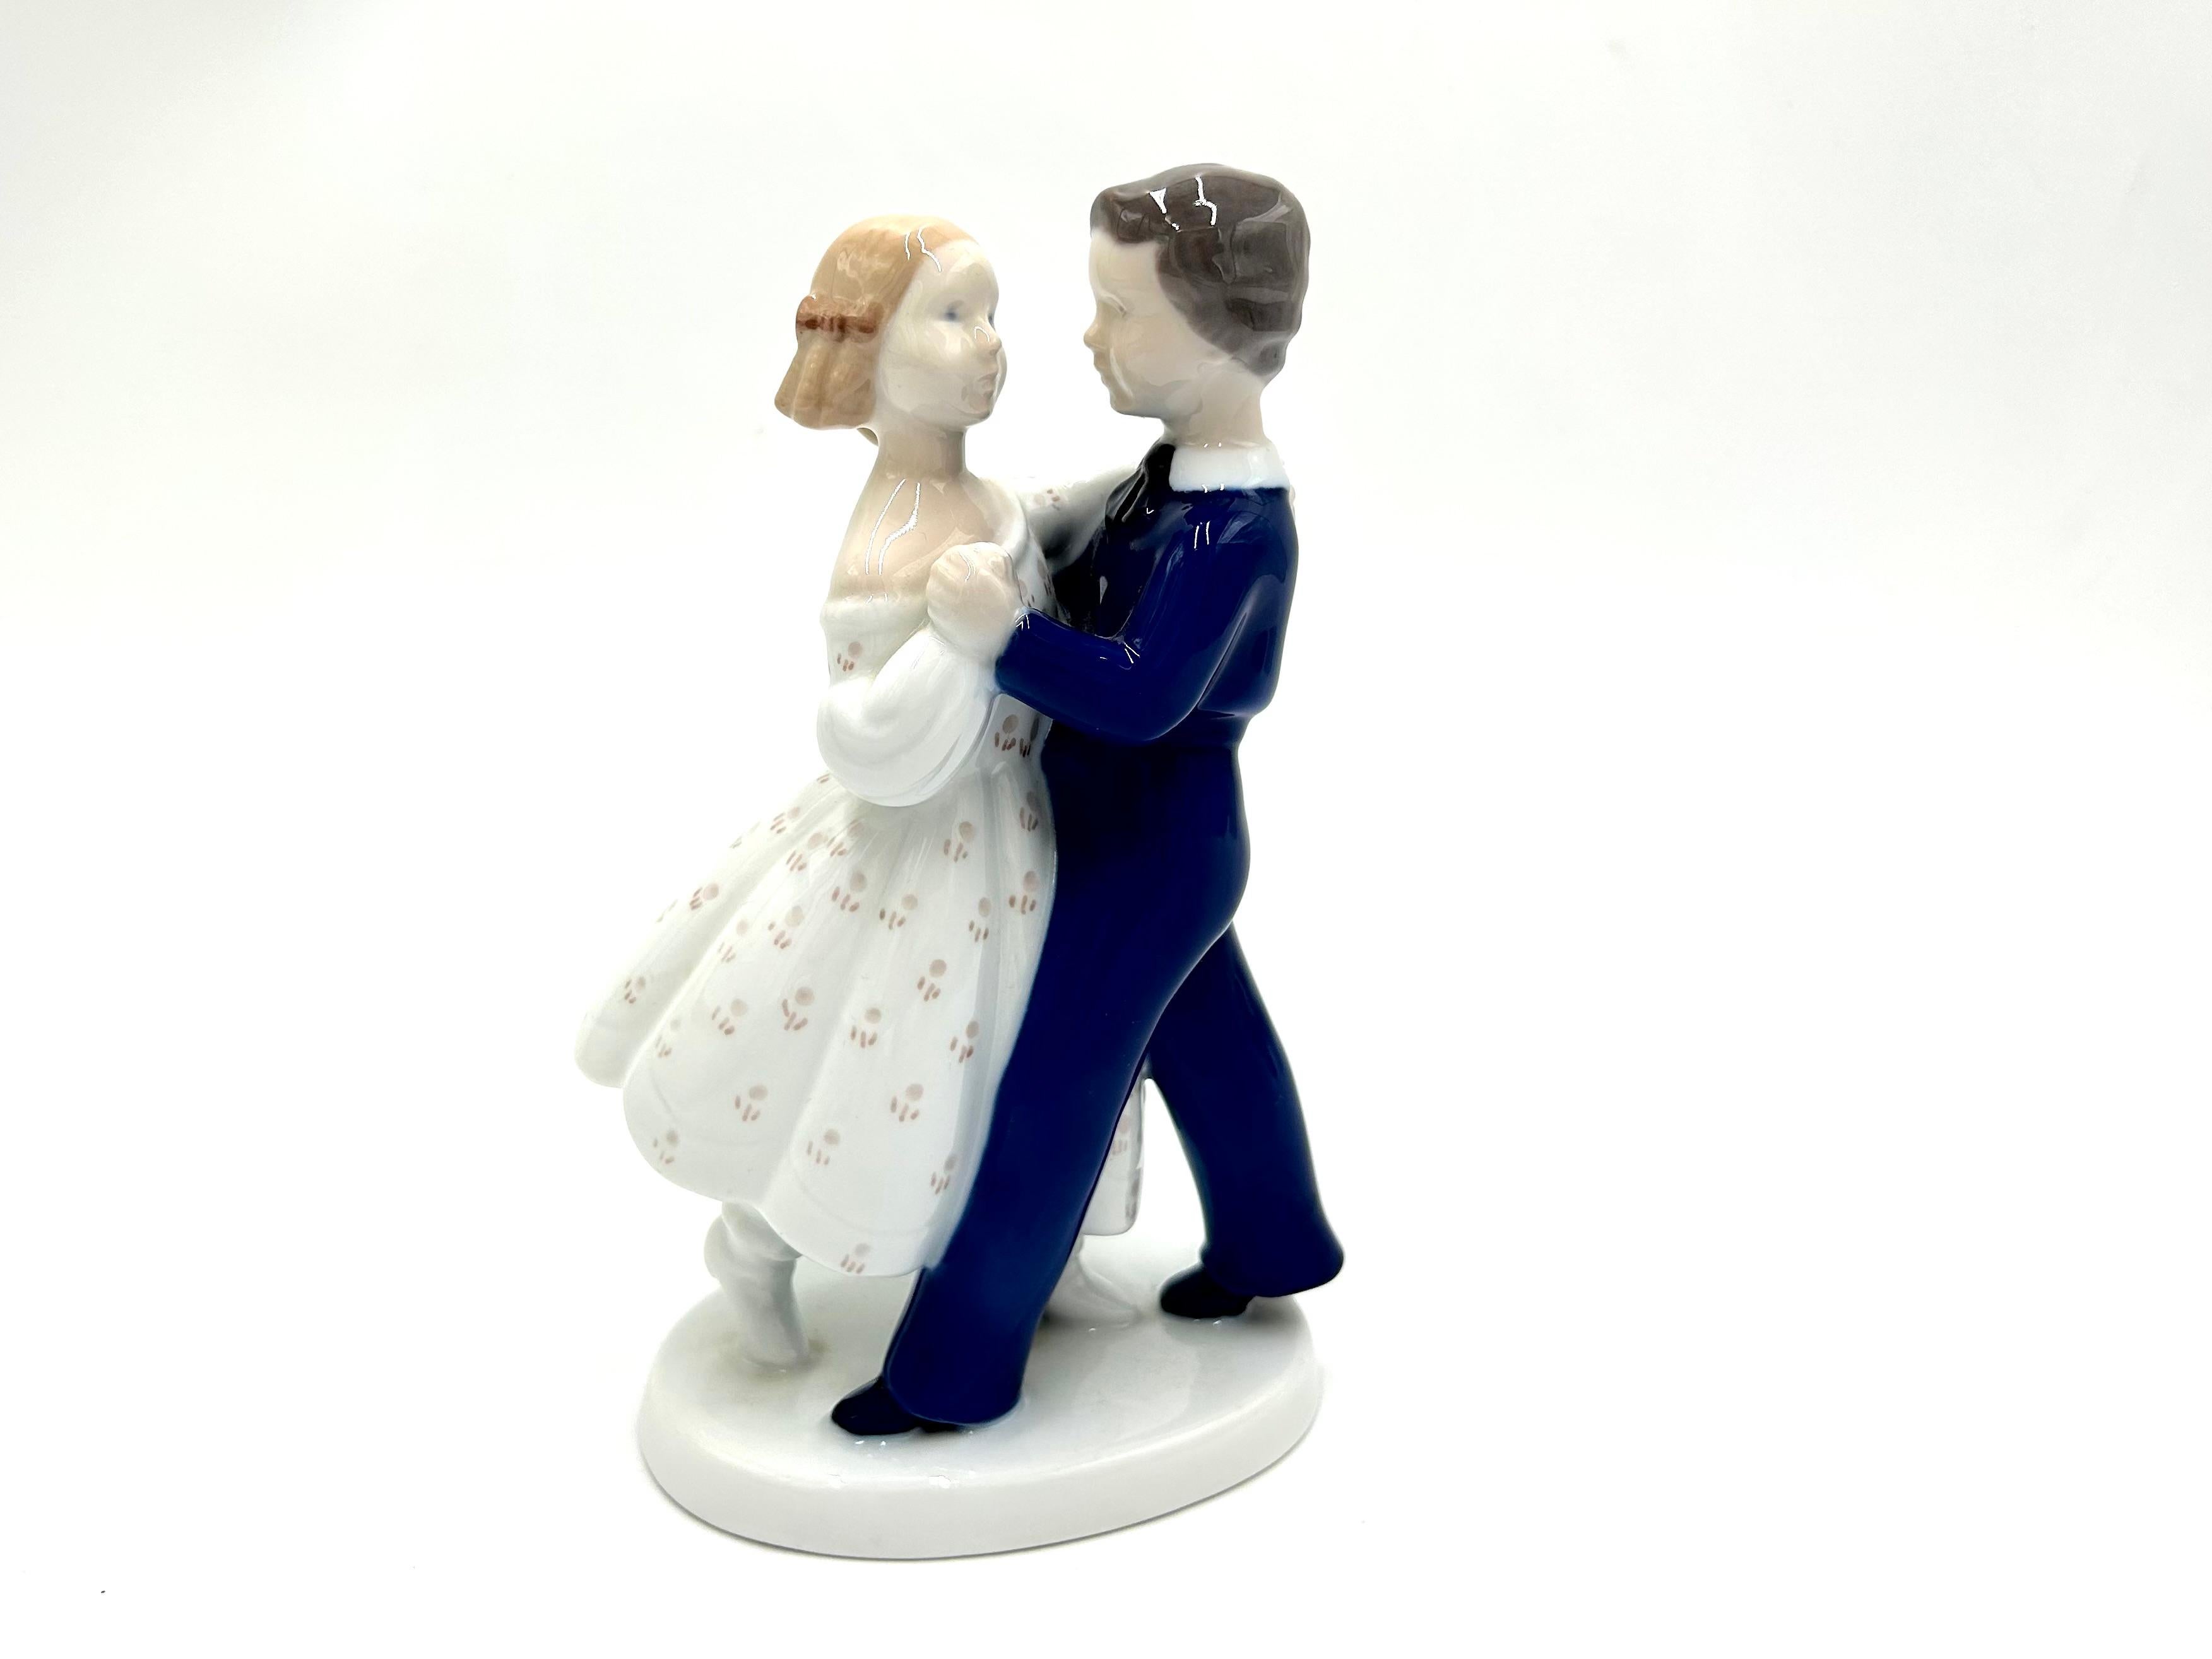 Porcelain figurine of a dancing couple.
Produced by the Danish manufacture Bing&Grondahl
Signature uses 1985-1991
Very good condition without damage
Measures: height: 20cm
width: 13cm
depth: 9cm